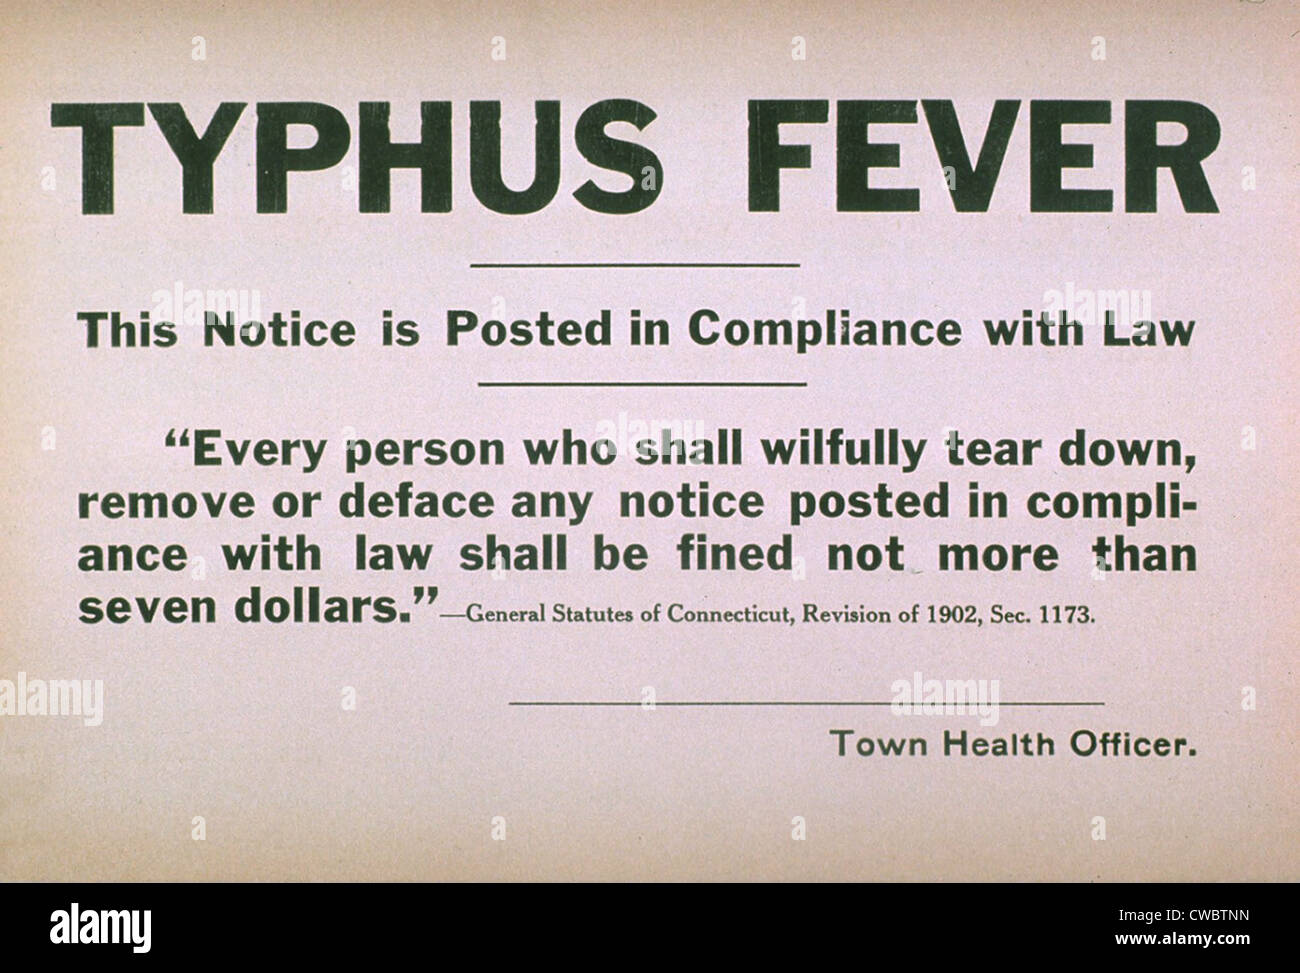 Early 20th century quarantine sign for the contagious disease typhus fever. Stock Photo